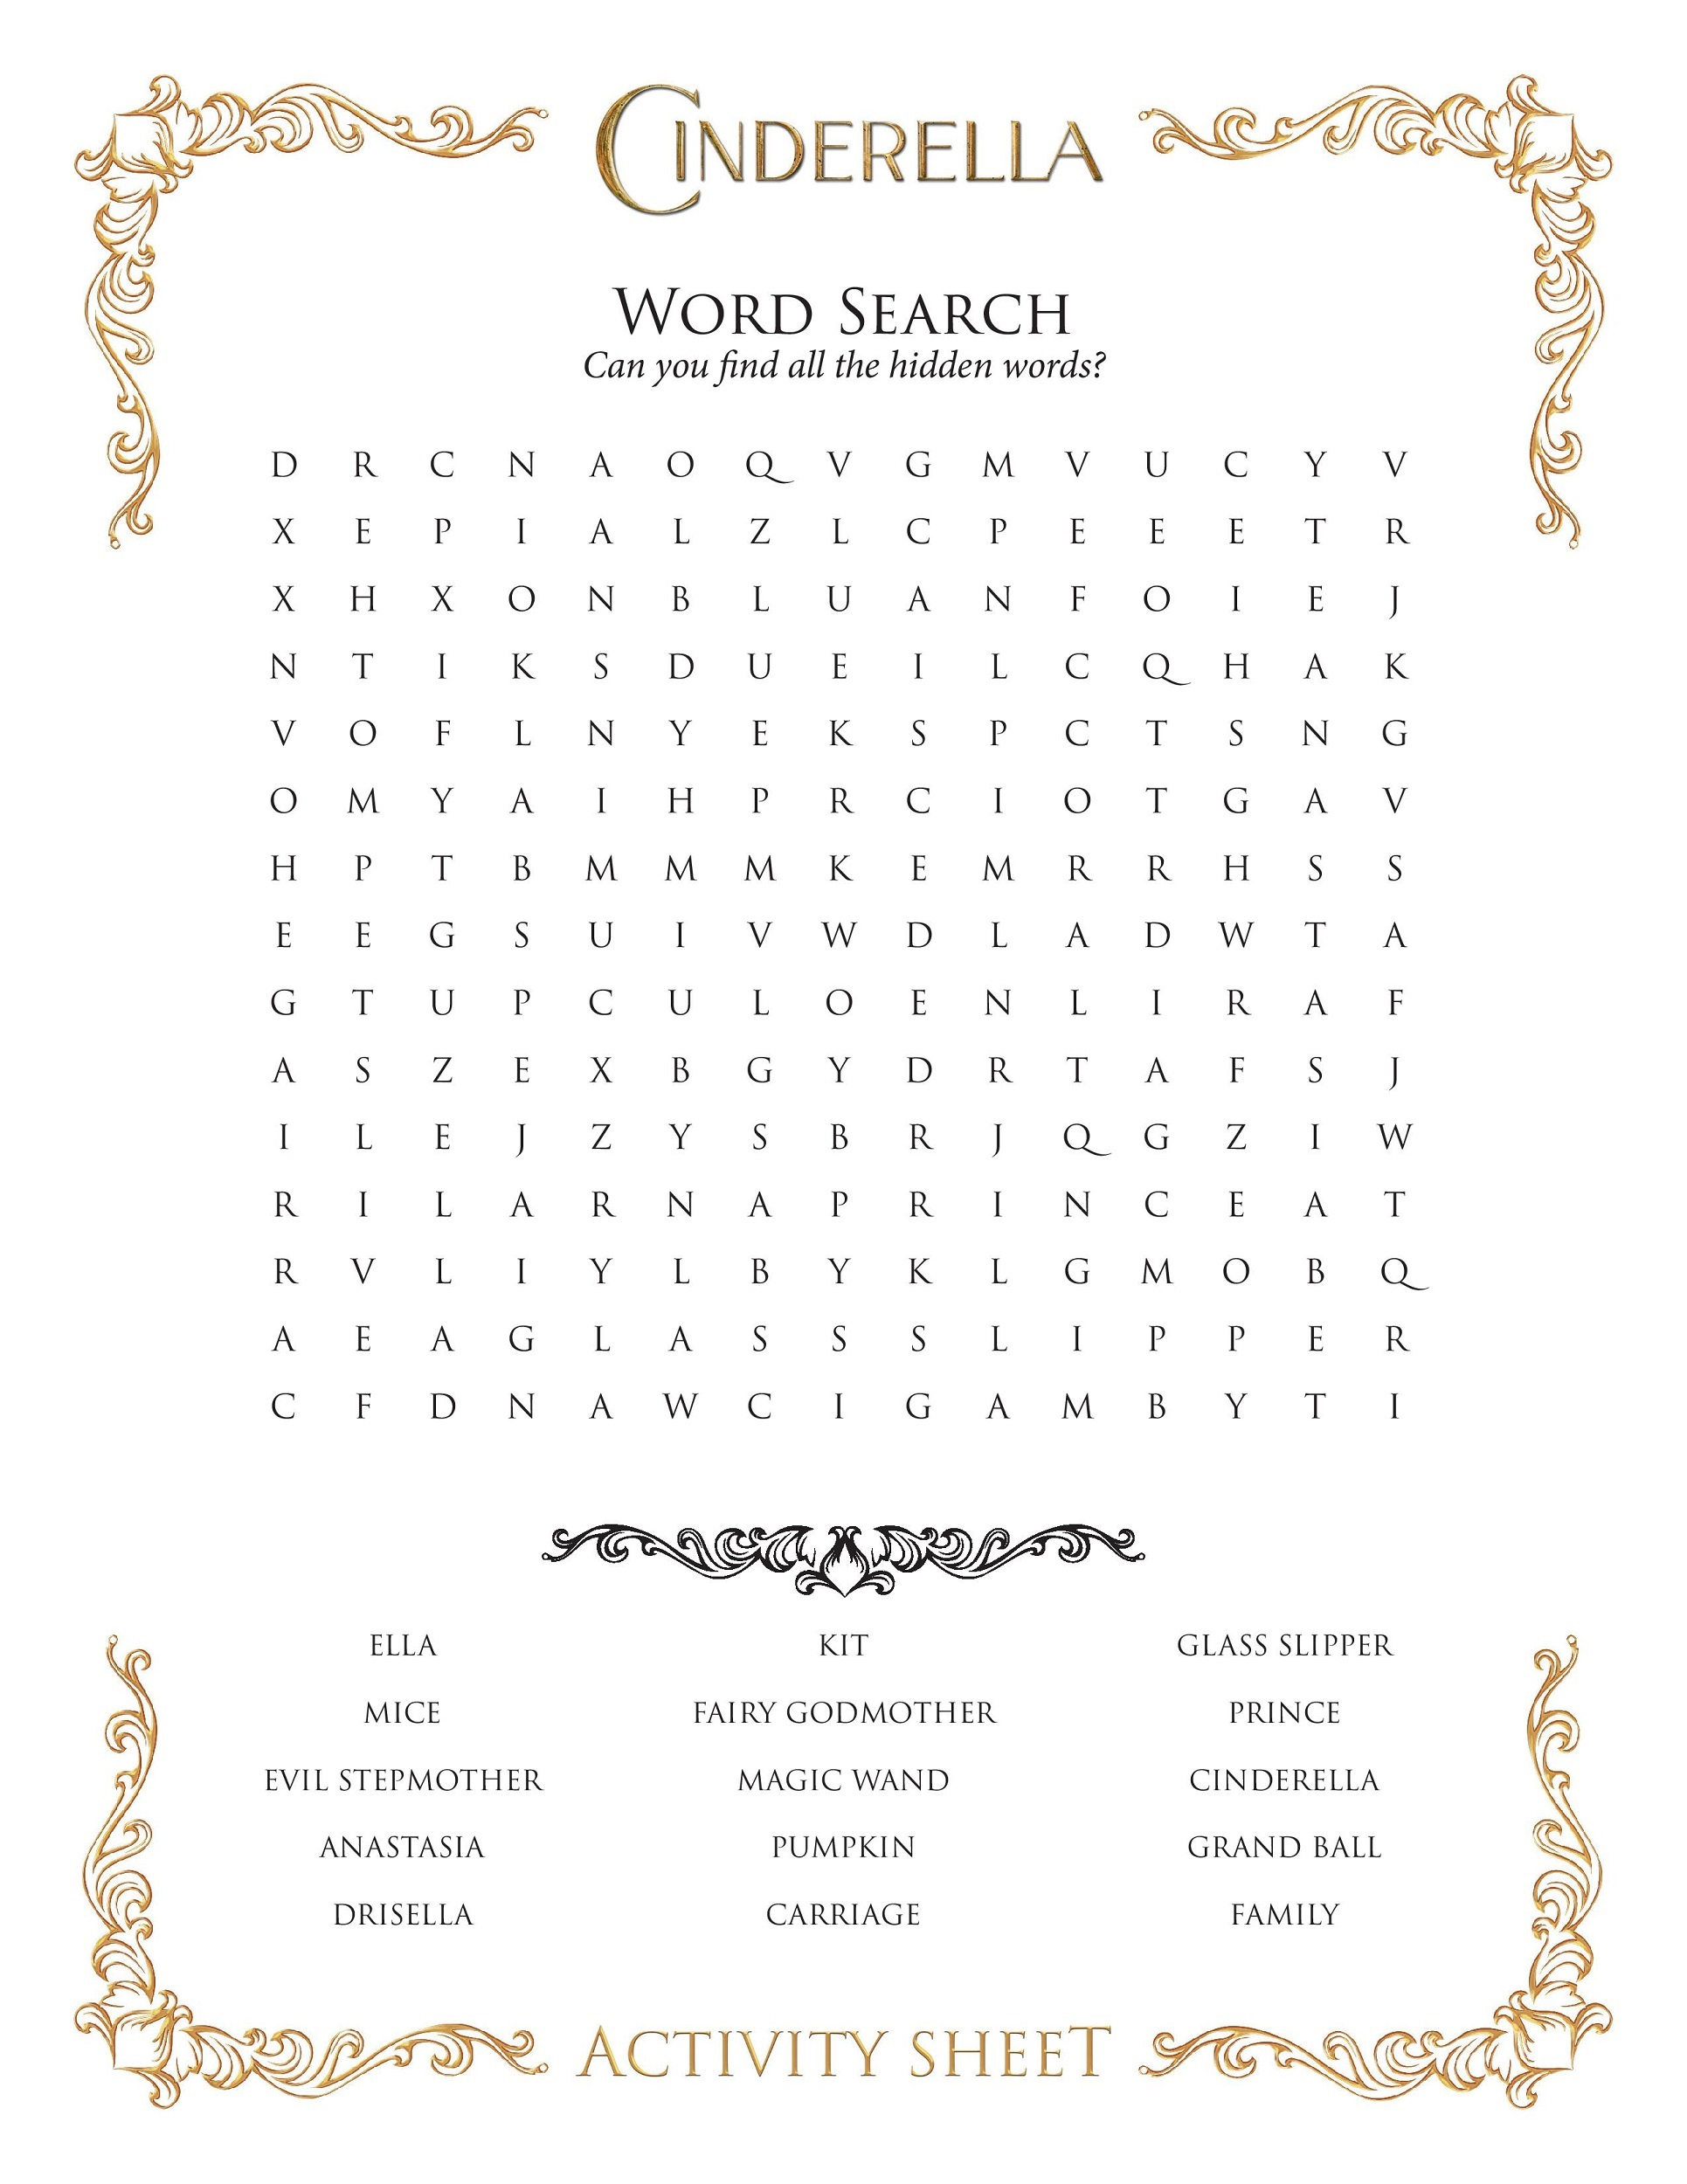 15 Free Disney Word Searches | Kittybabylove throughout Printable Disney Word Search